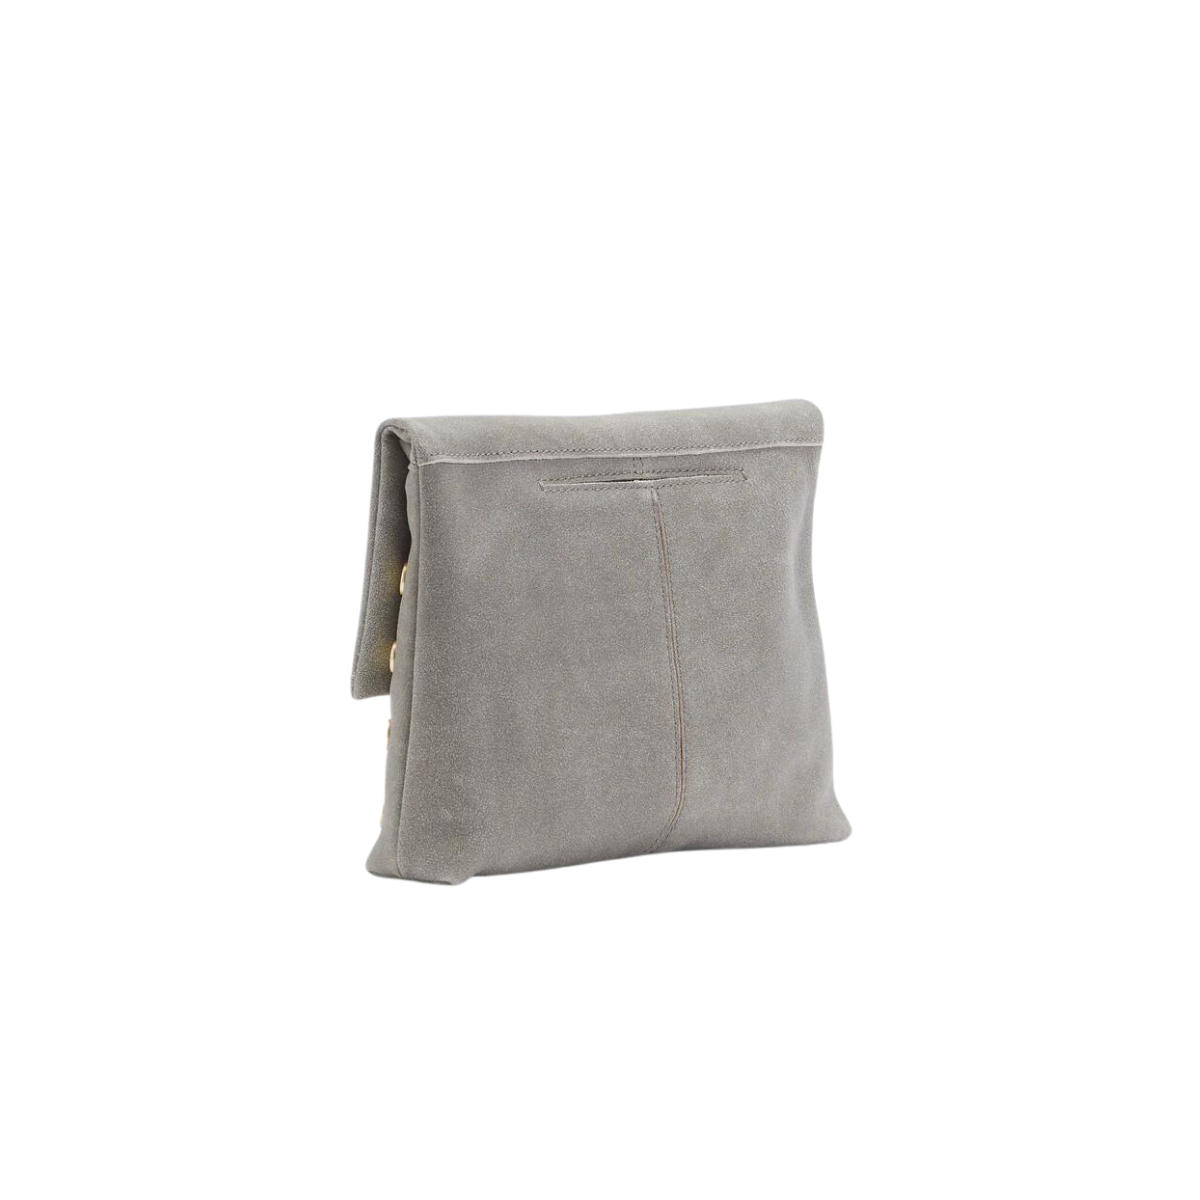 Hammitt VIP Medium in Pewter with Brushed Gold